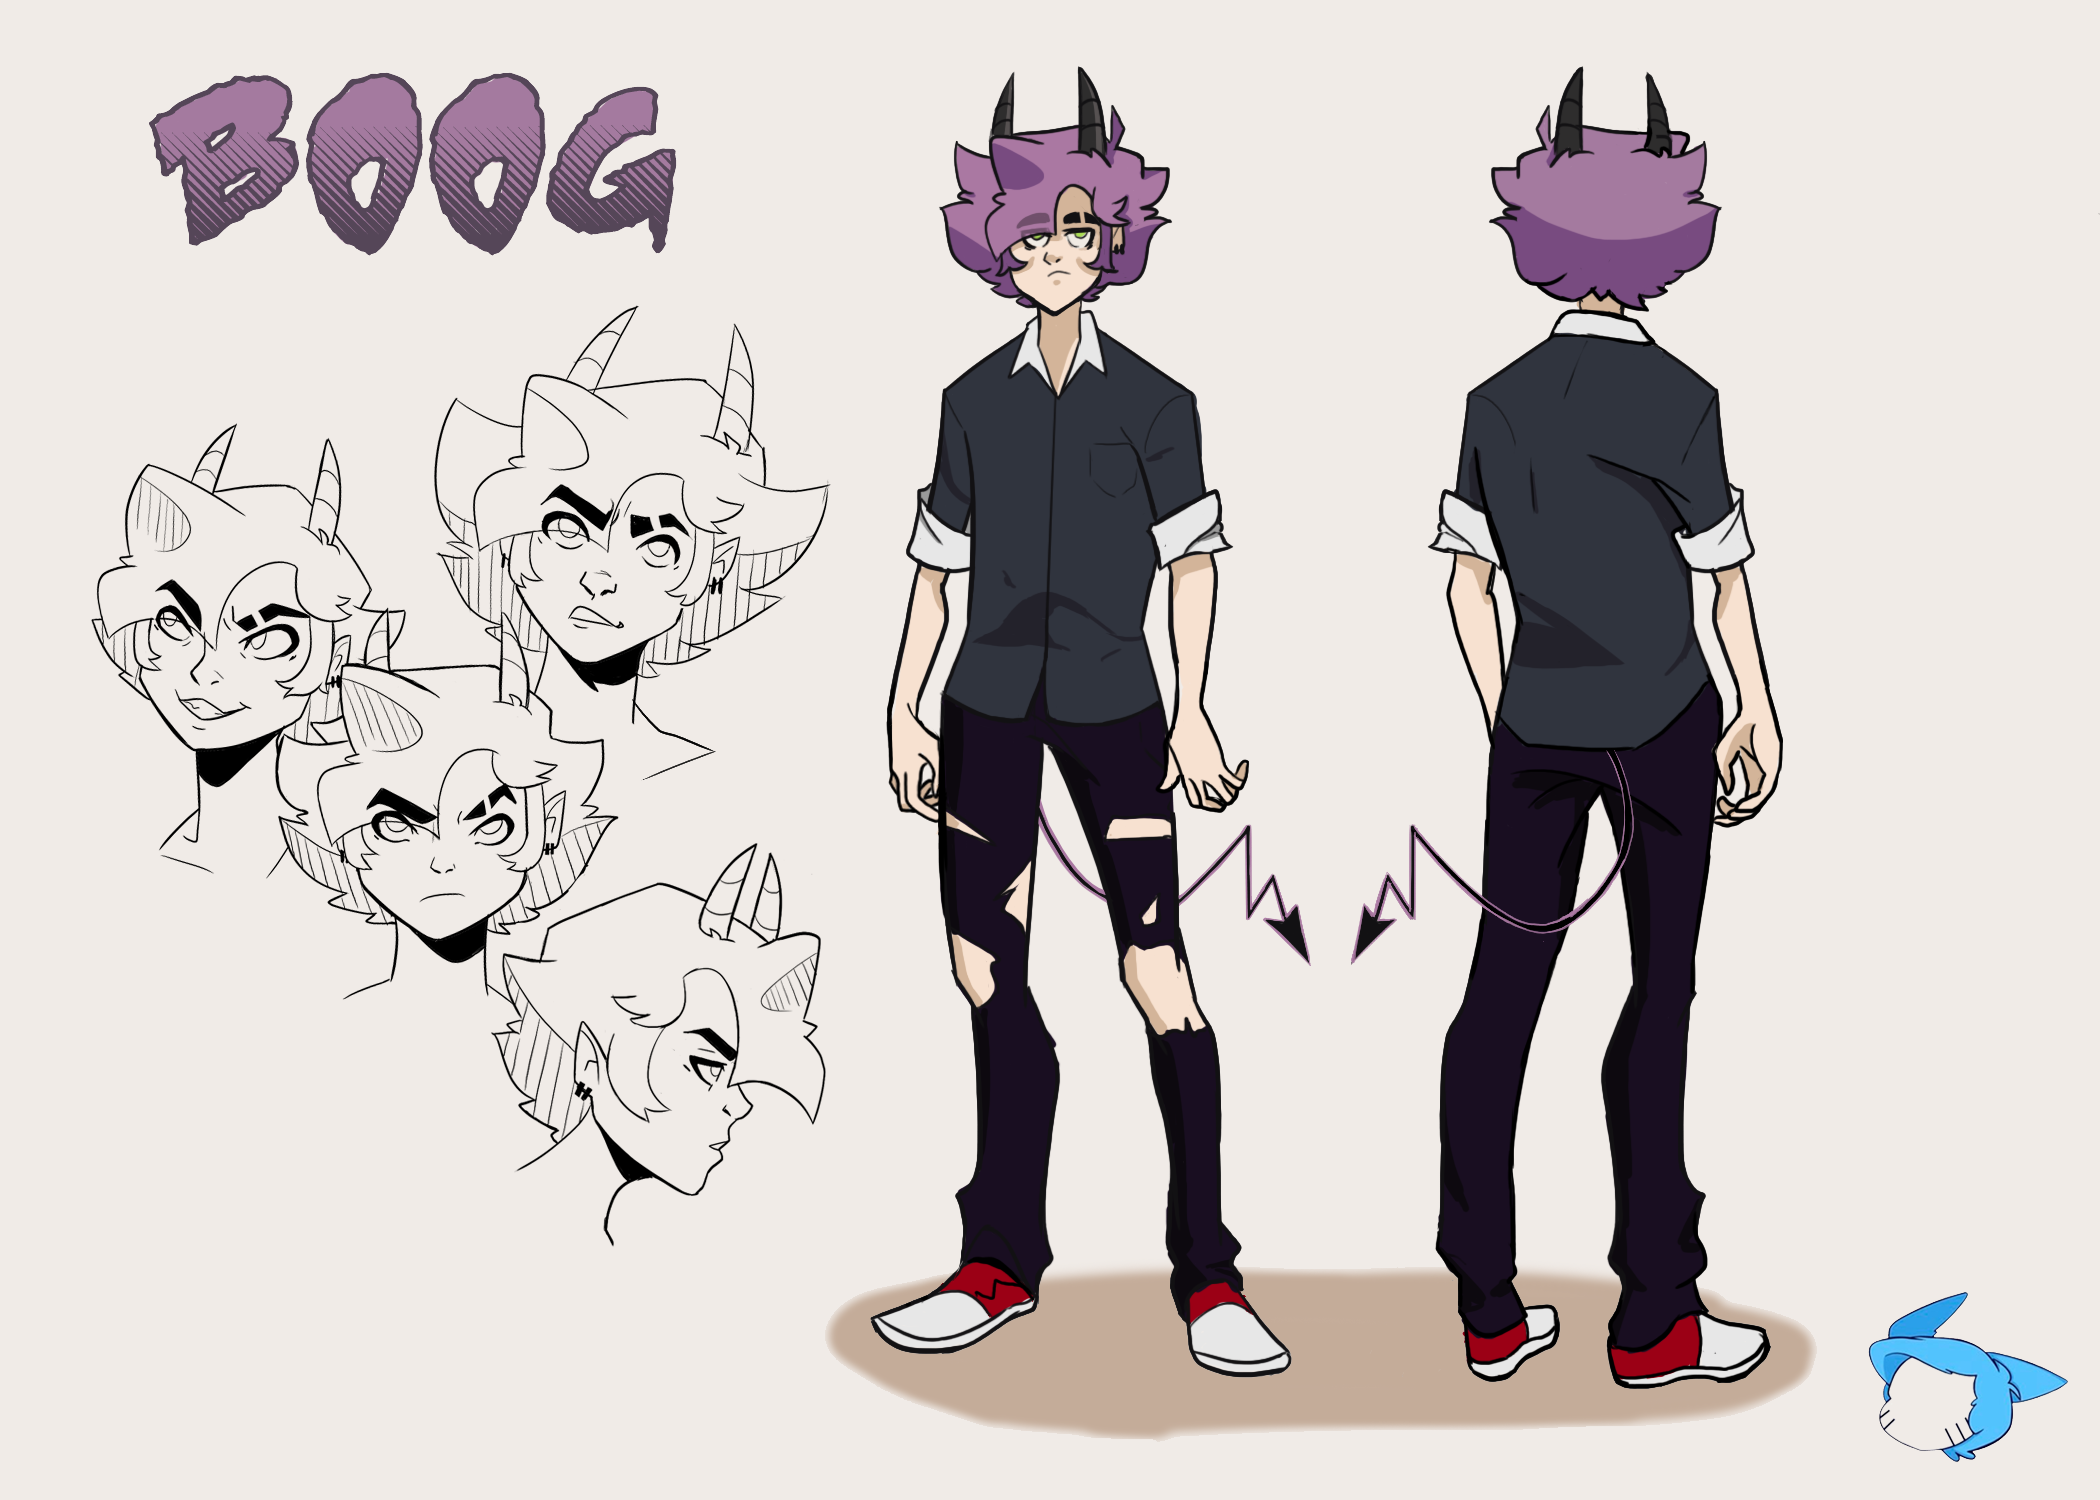  / Still of character and expressions of Boog, the main character of a comic I am making.